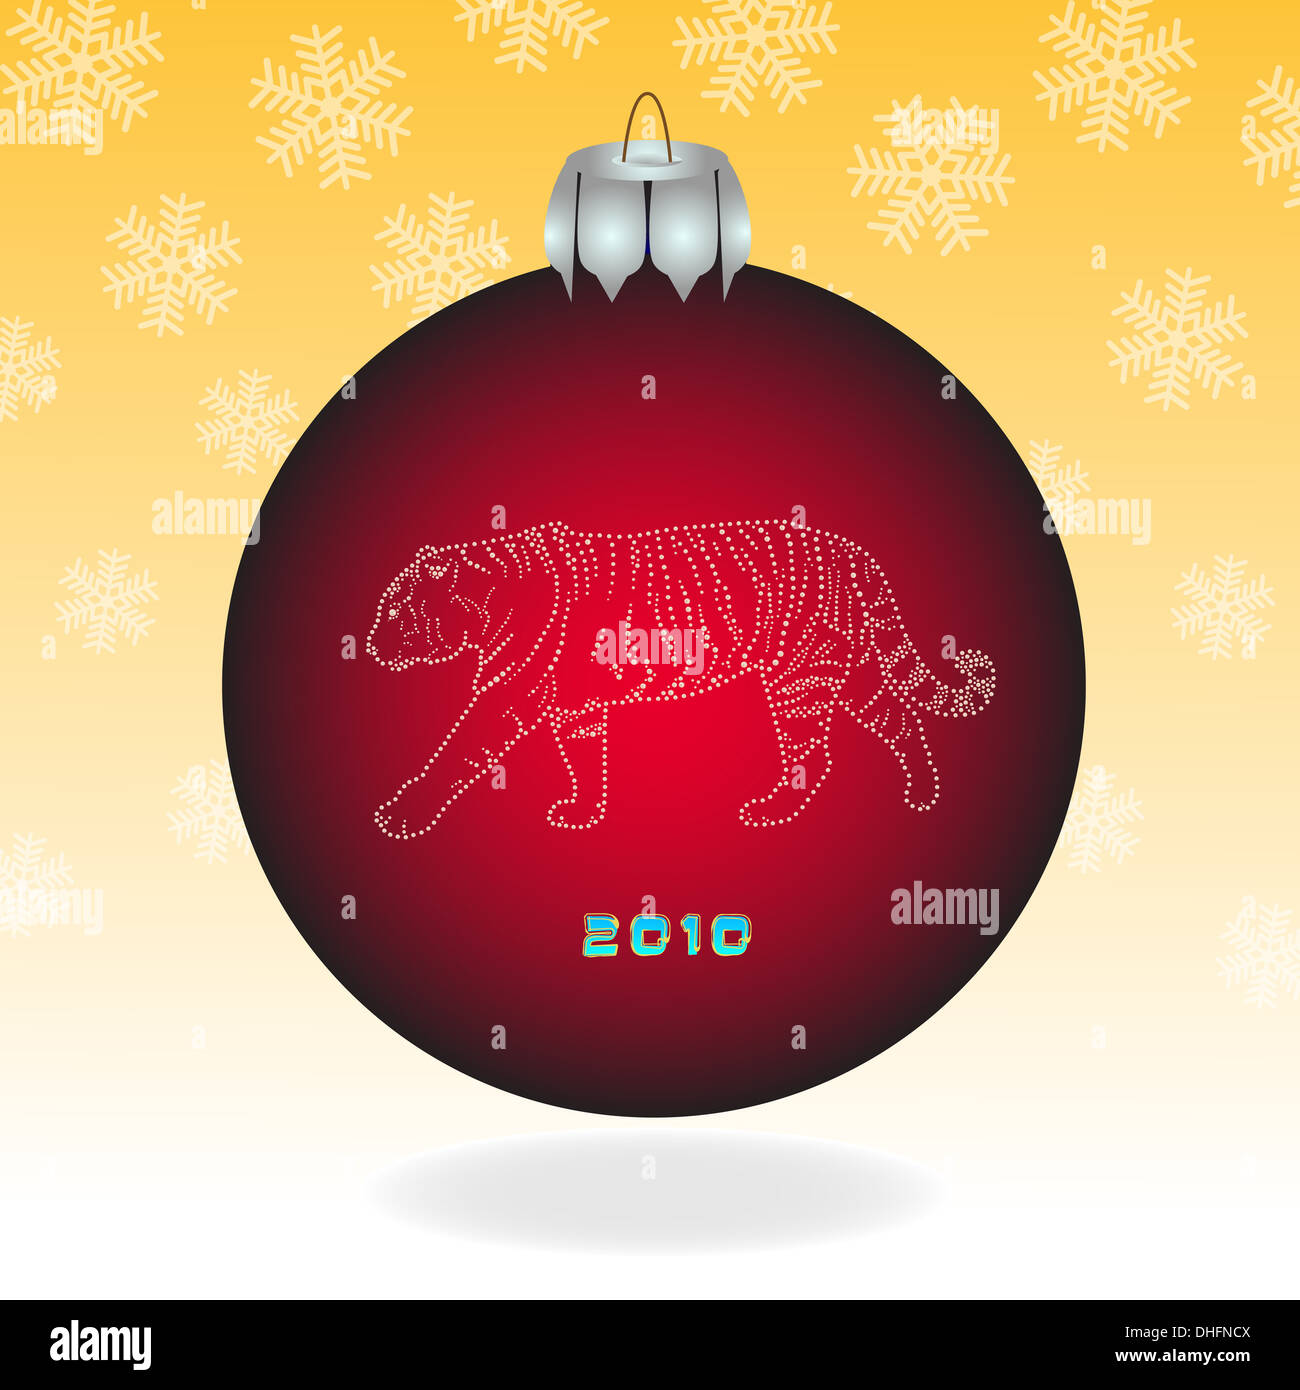 Red fur-tree ball with a tiger on an orange background with snowflakes. Stock Photo